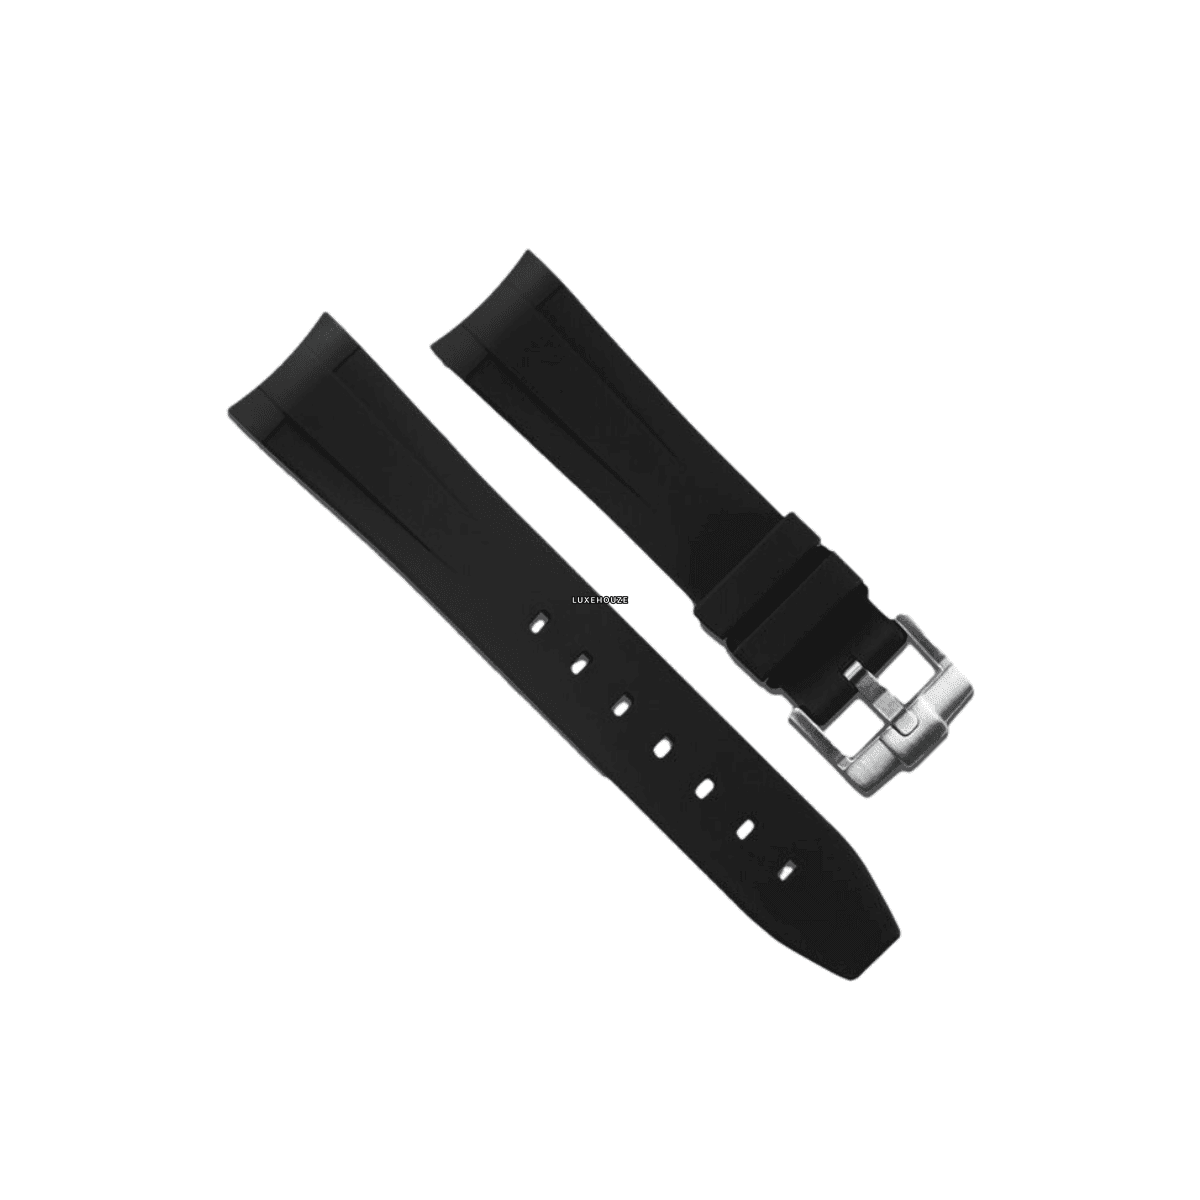 Datejust 36mm Tang Buckle Series Watch Bands RUBBER B Jet Black 